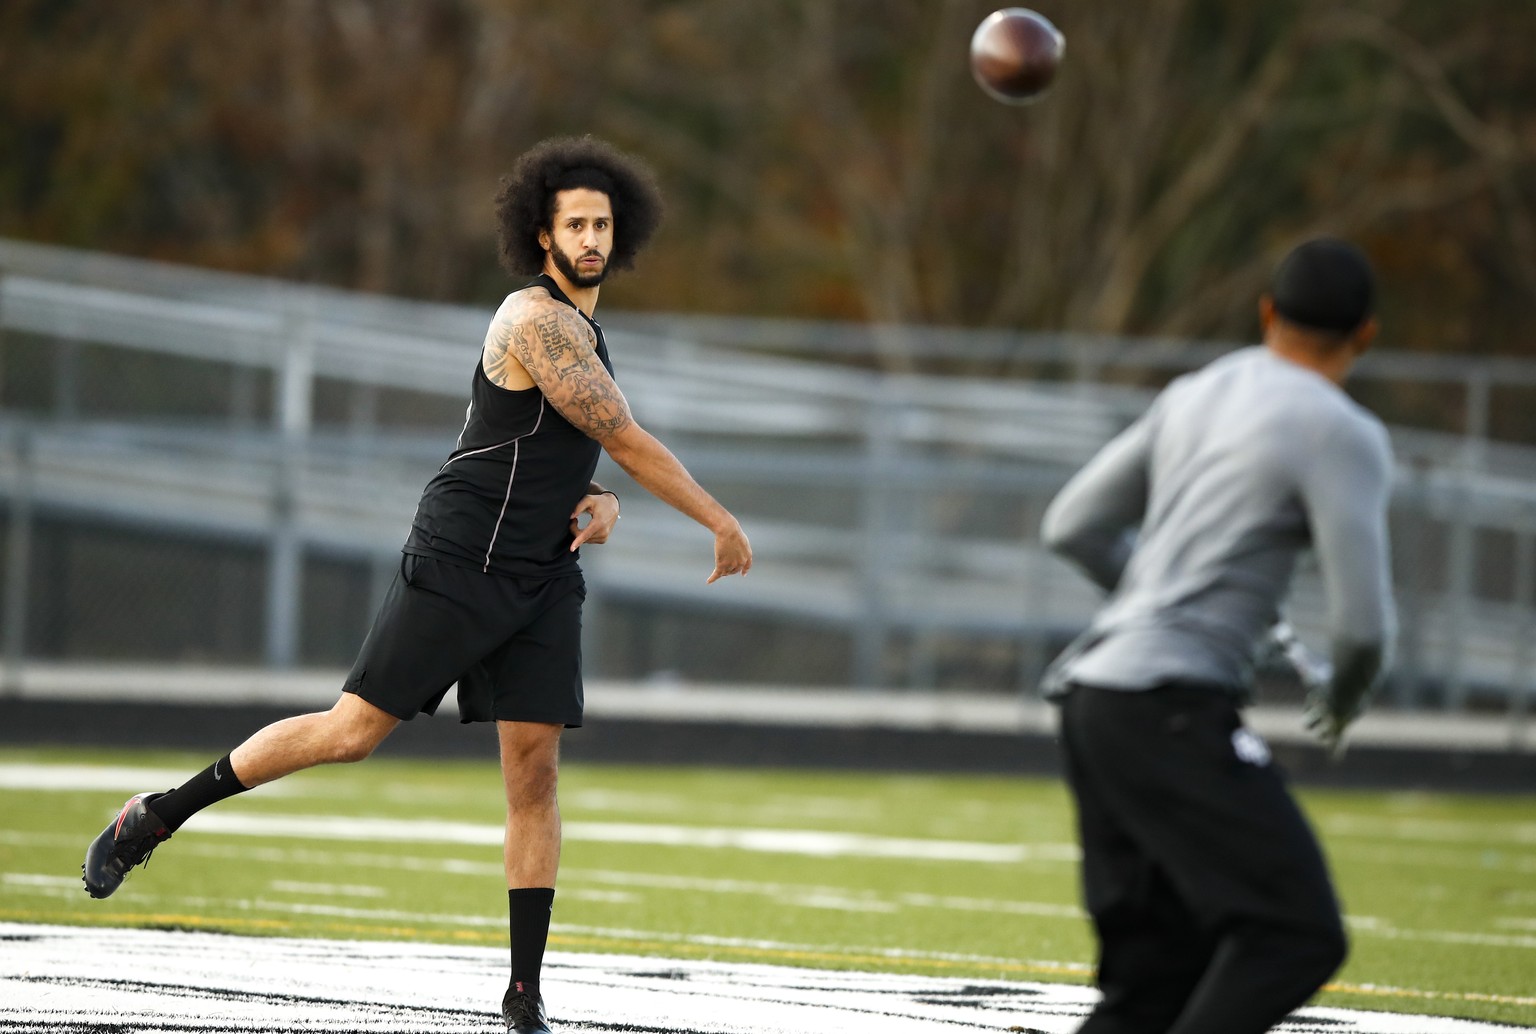 Free agent quarterback Colin Kaepernick participates in a workout for NFL football scouts and media, Saturday, Nov. 16, 2019, in Riverdale, Ga. (AP Photo/Todd Kirkland)